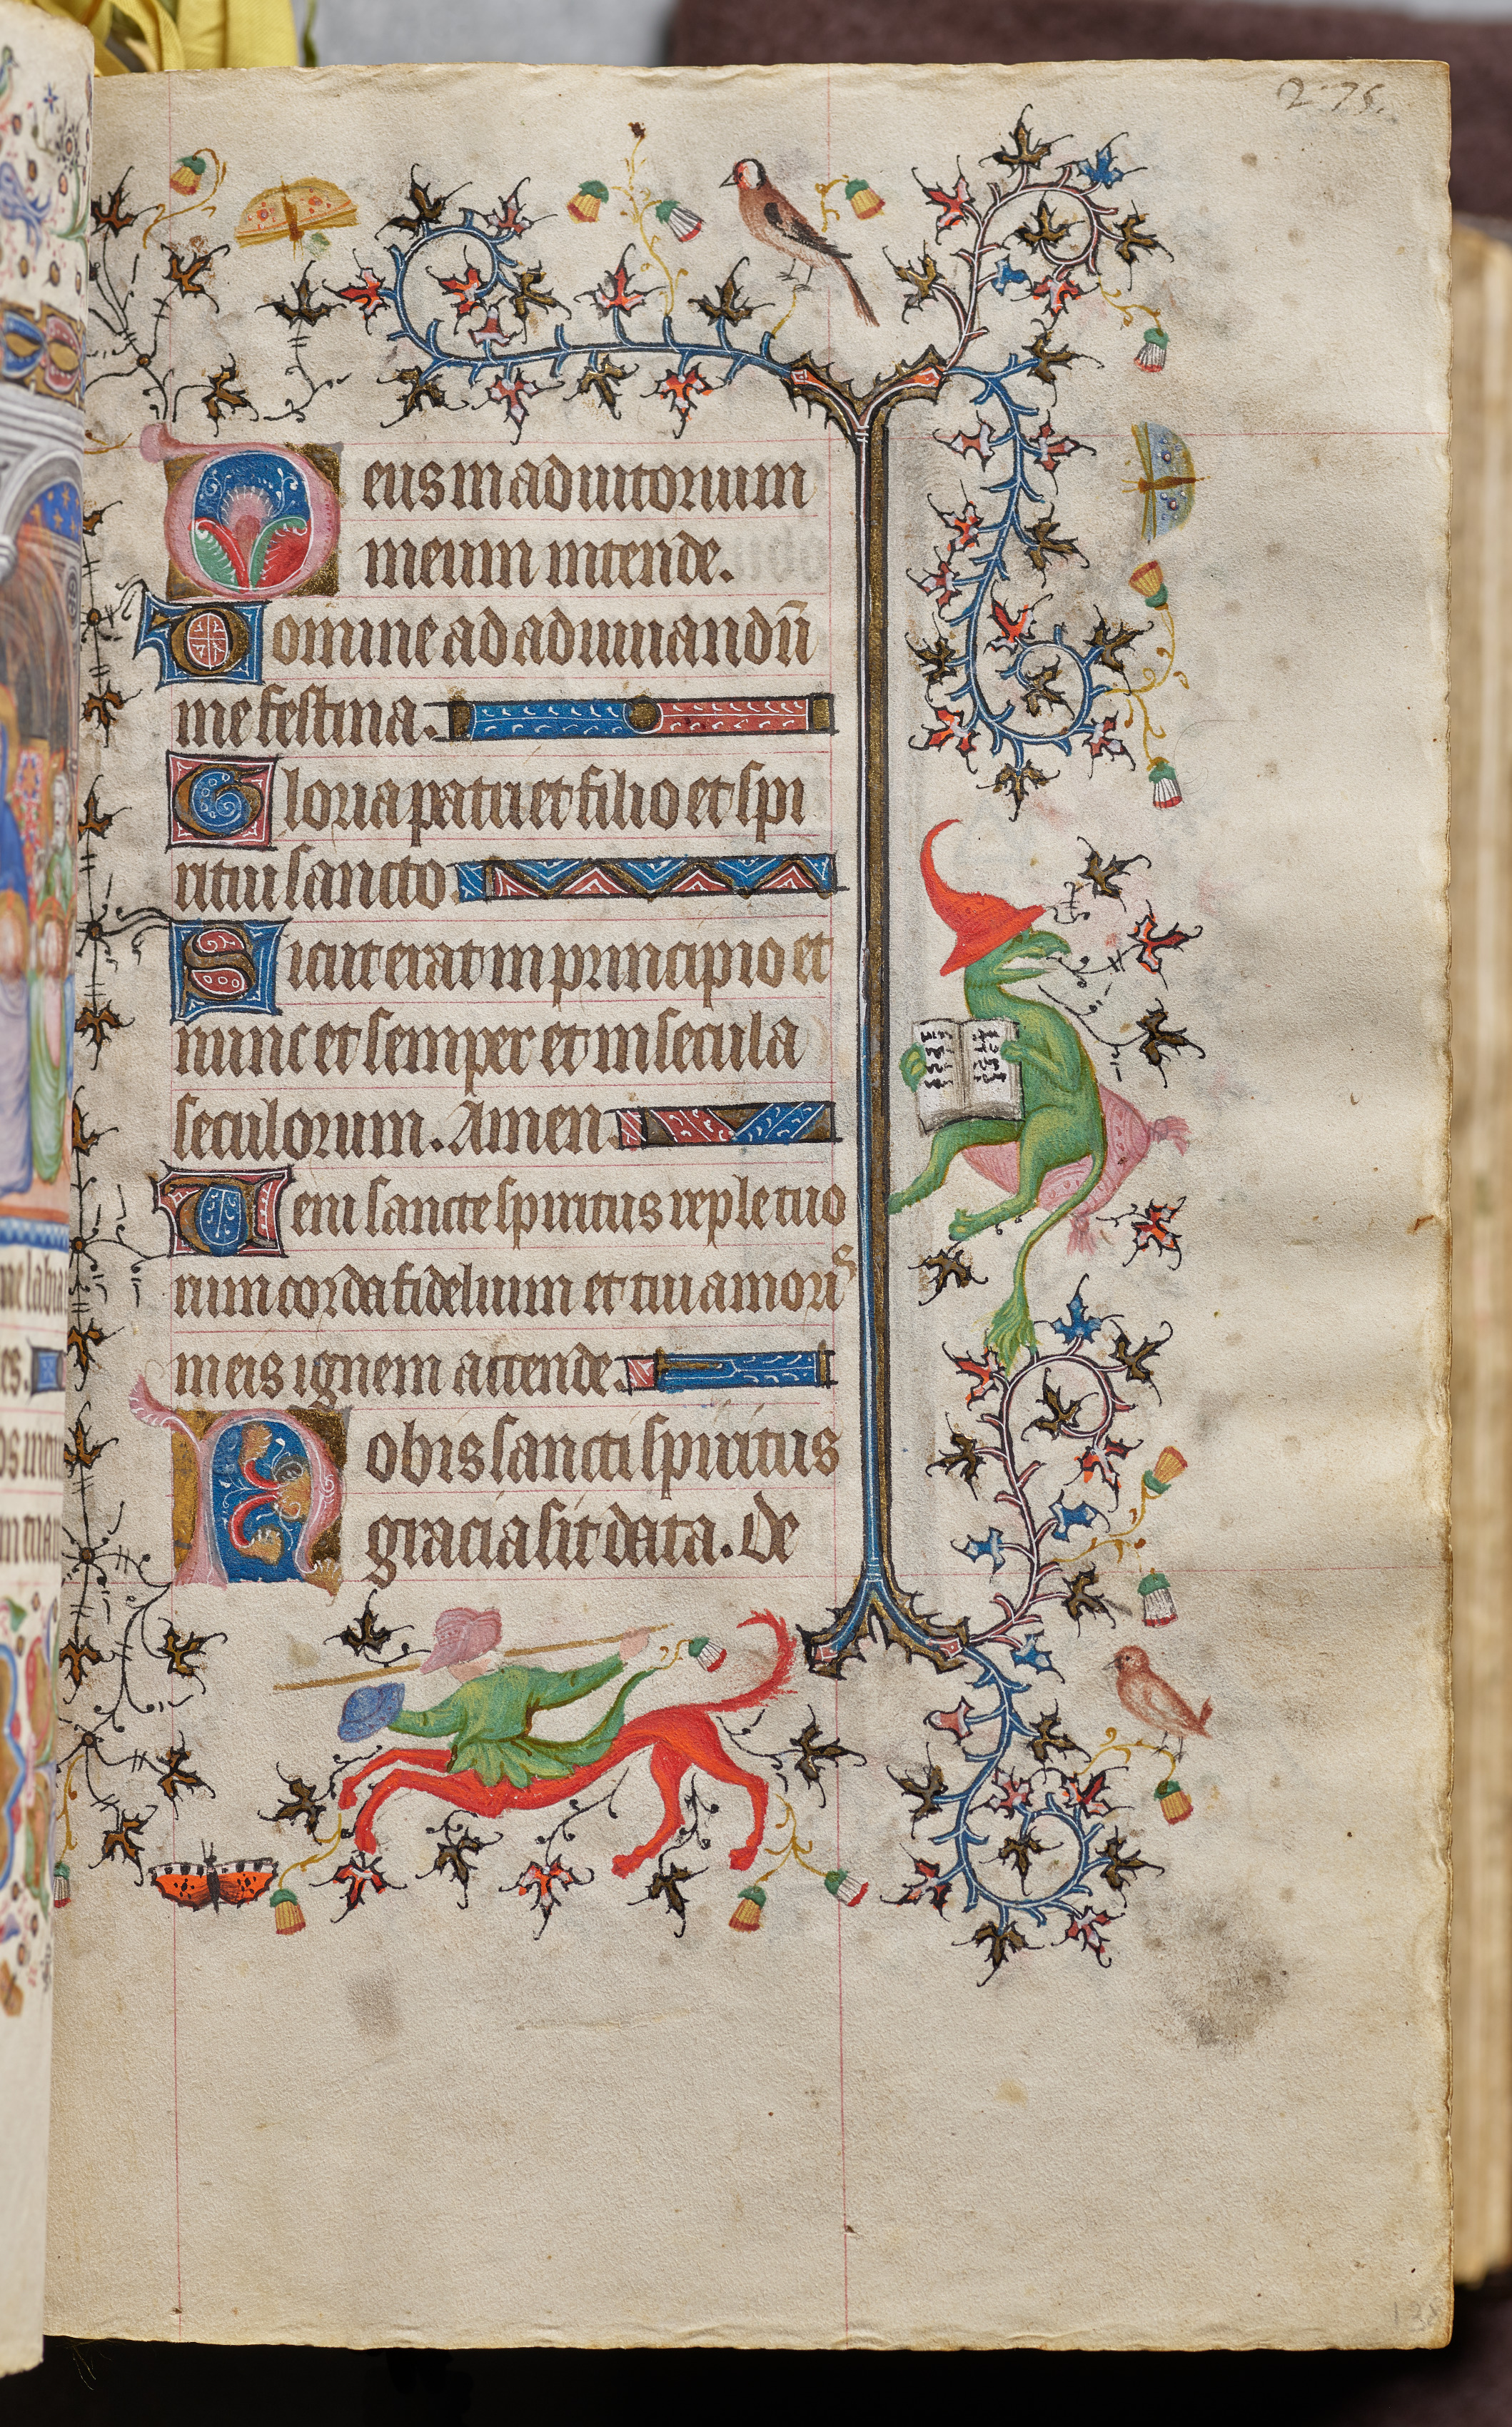 Hours of Charles the Noble, King of Navarre (1361-1425): fol. 138r, Text